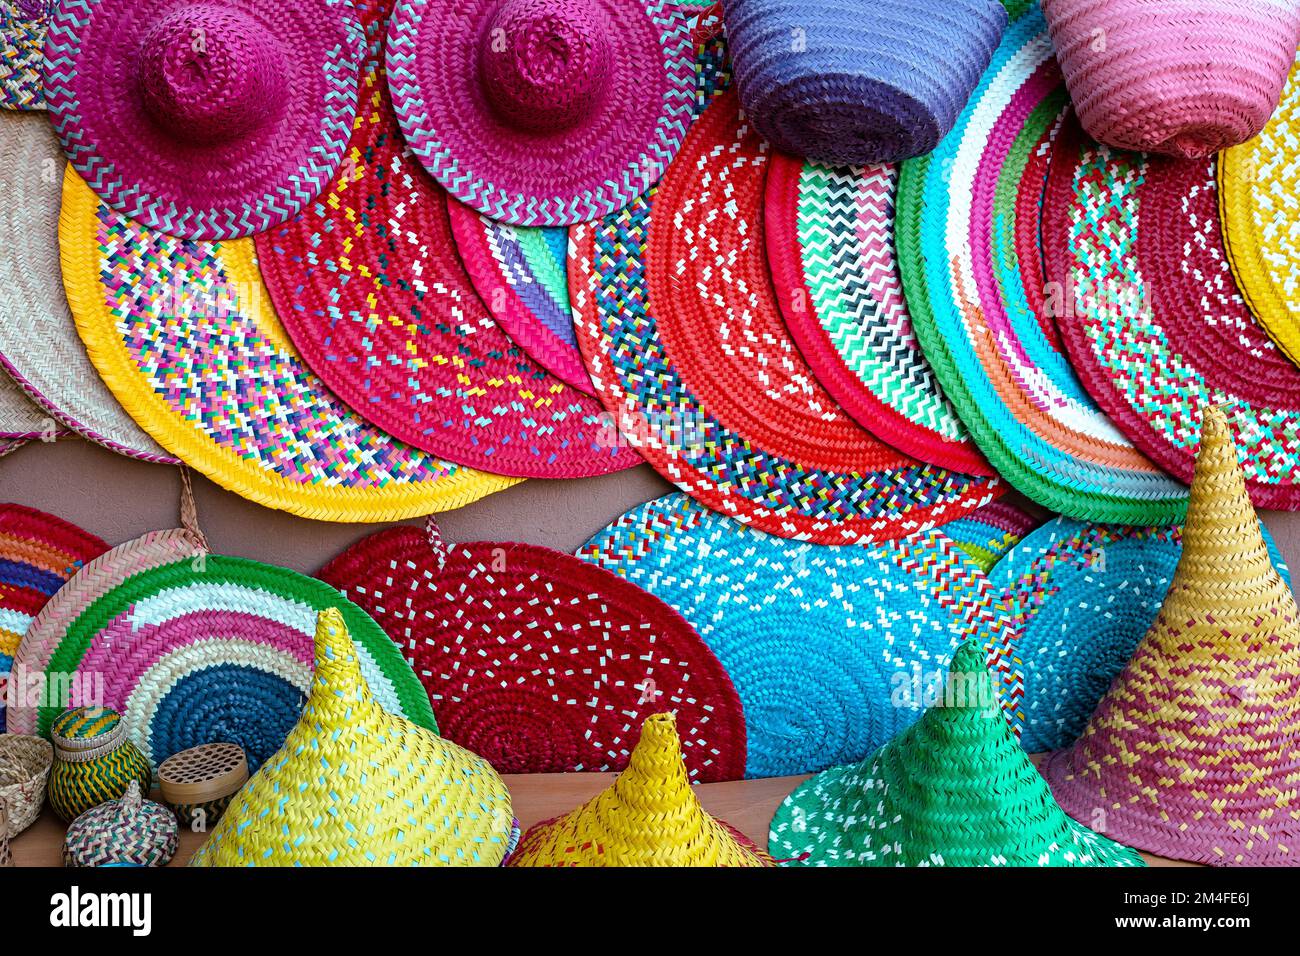 Omani Souvenirs. Traditional Colorful Baskets and Wicker Hats. Arabic ...